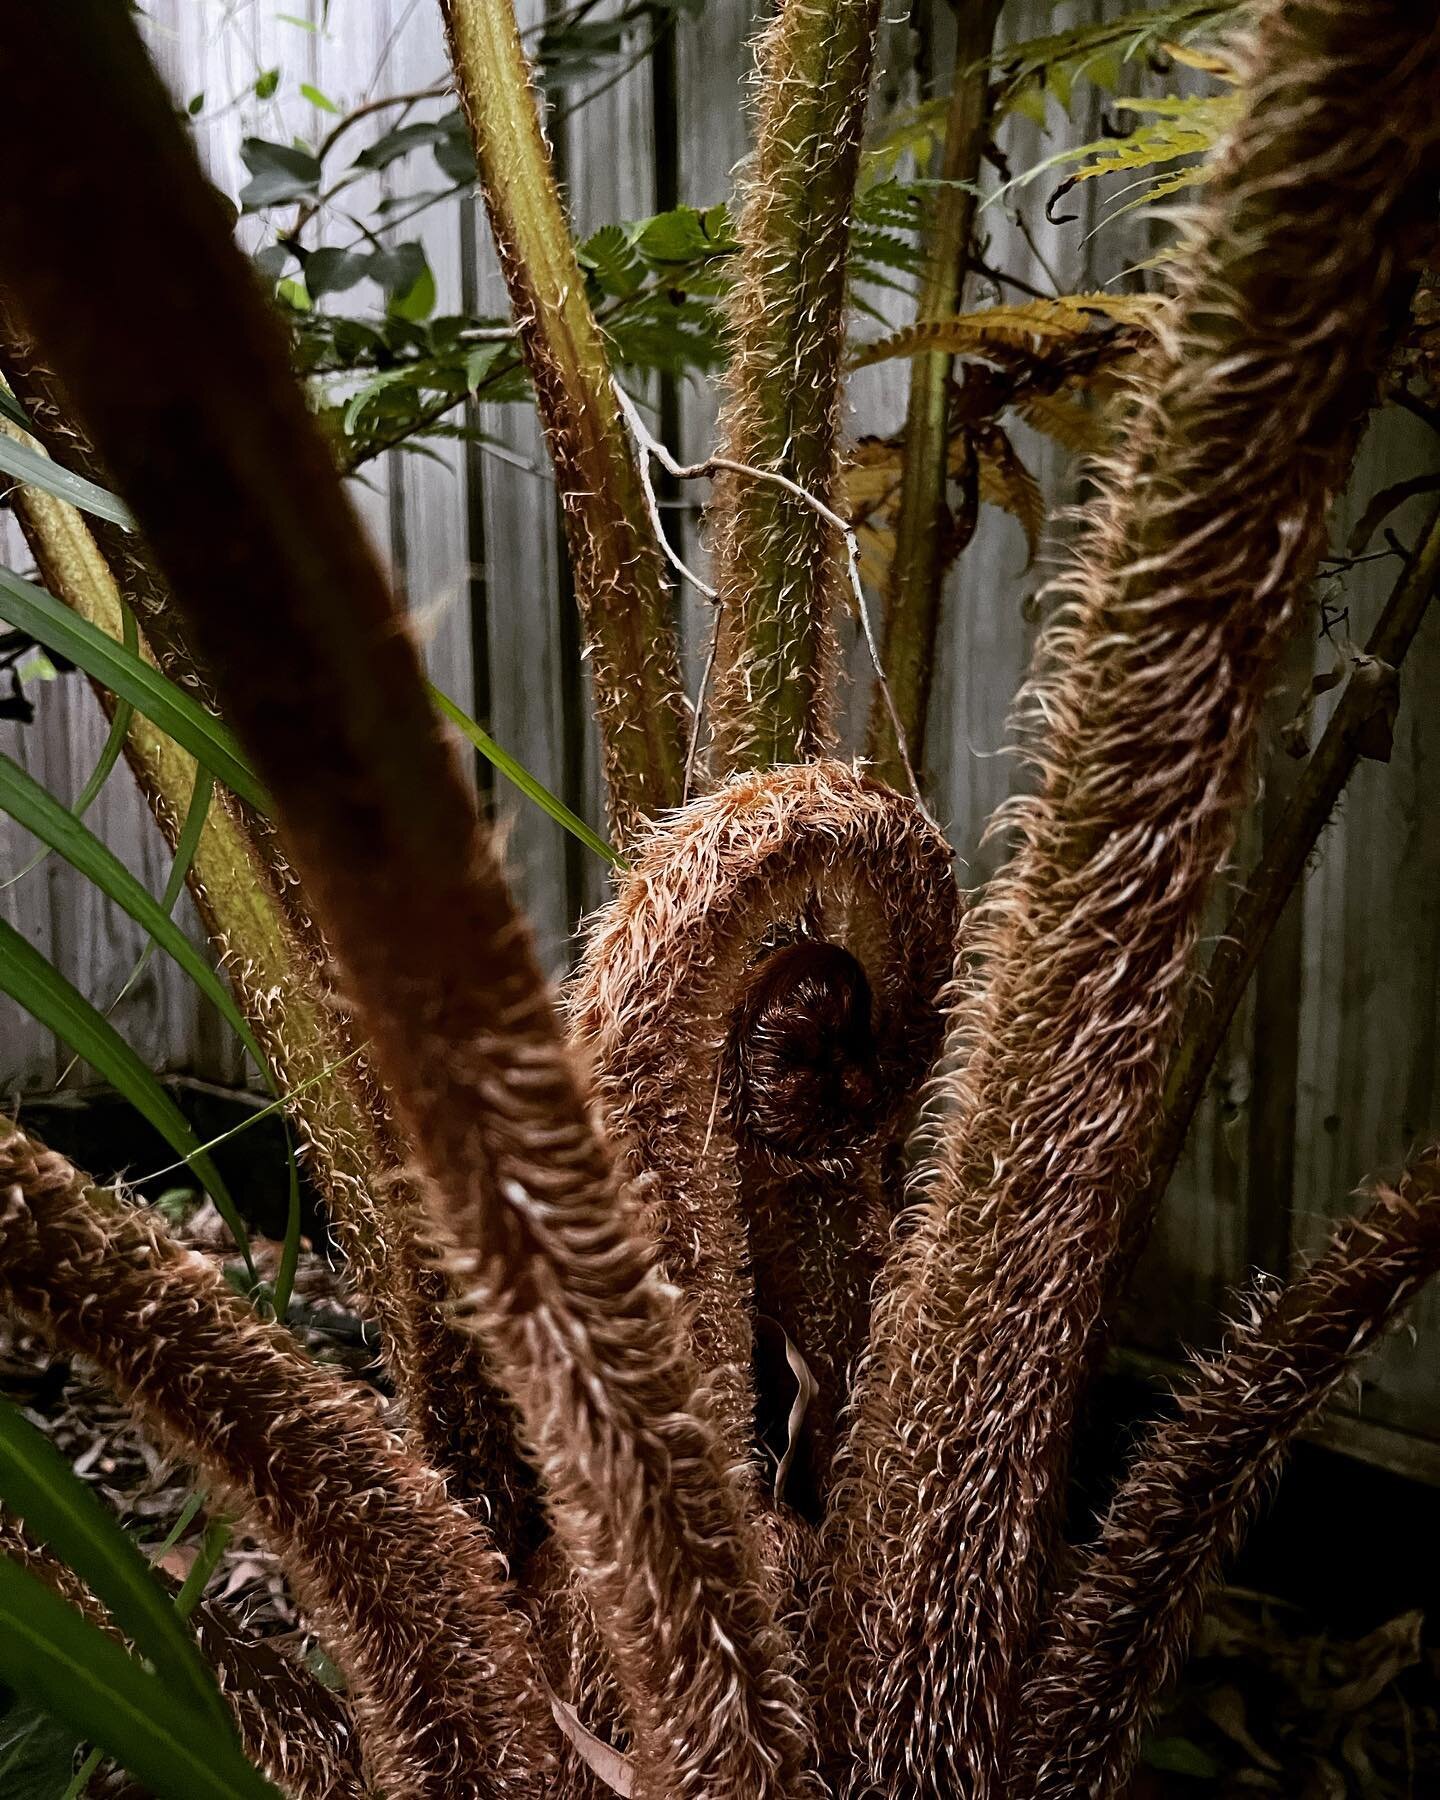 Nature doing its thing in our yard&hellip;.never ceases to amaze. One of my all time favorite plants commonly known as the Tree Fern. Just incredibly beautiful. I wonder in awe. 
#nature #treefern